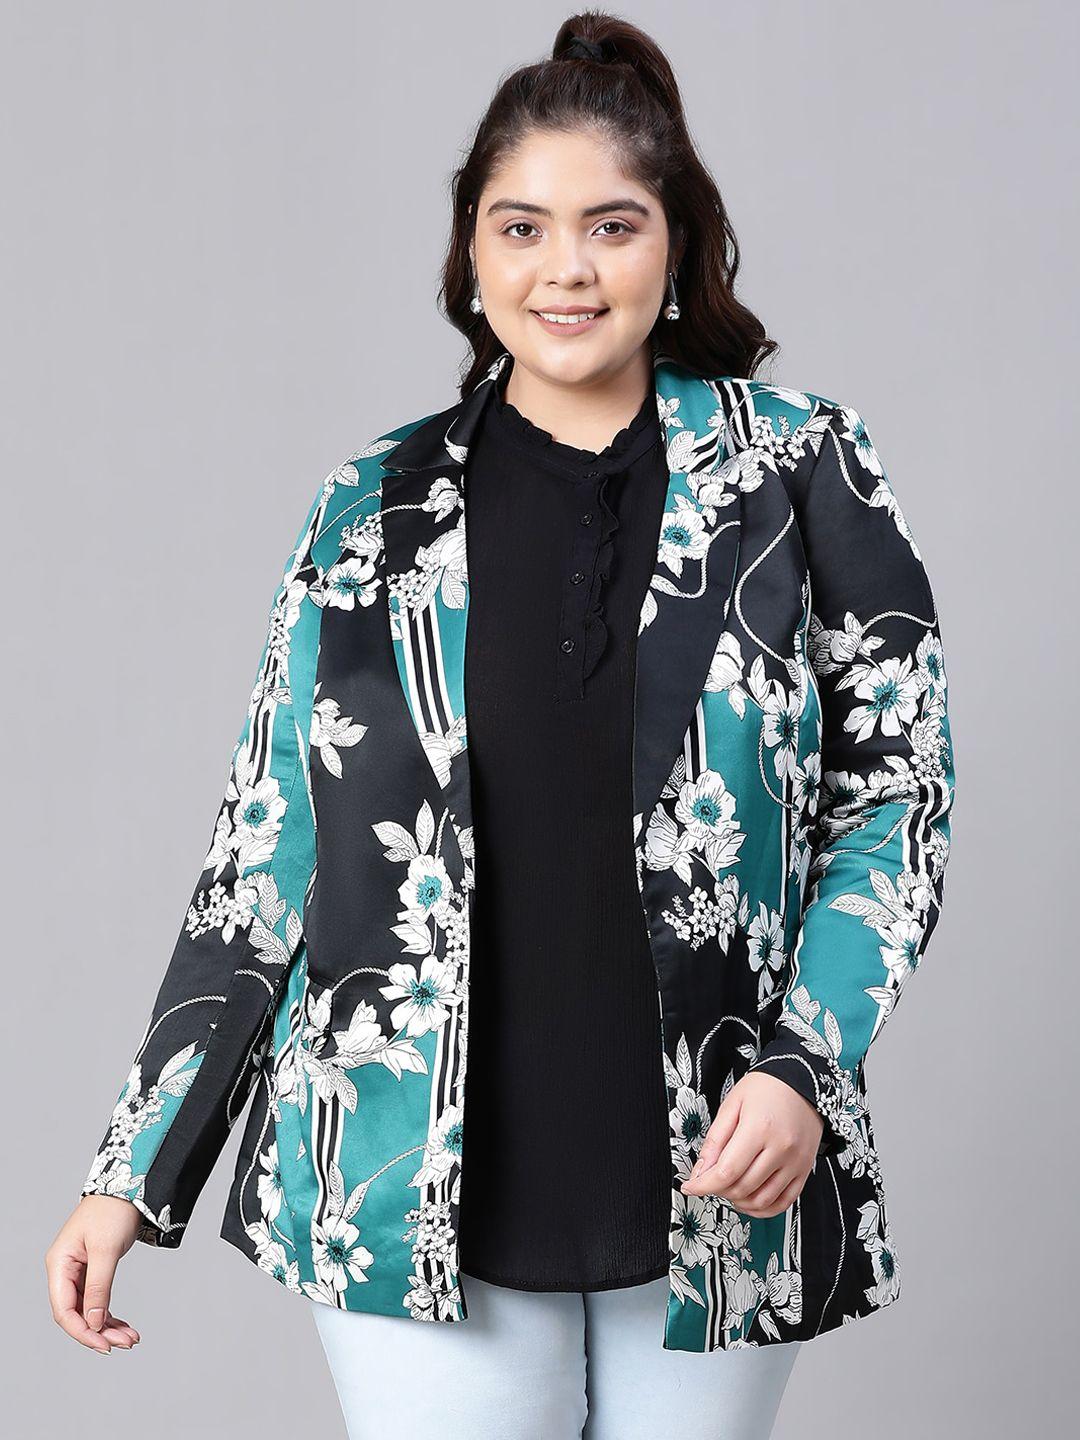 oxolloxo floral printed single breasted blazer